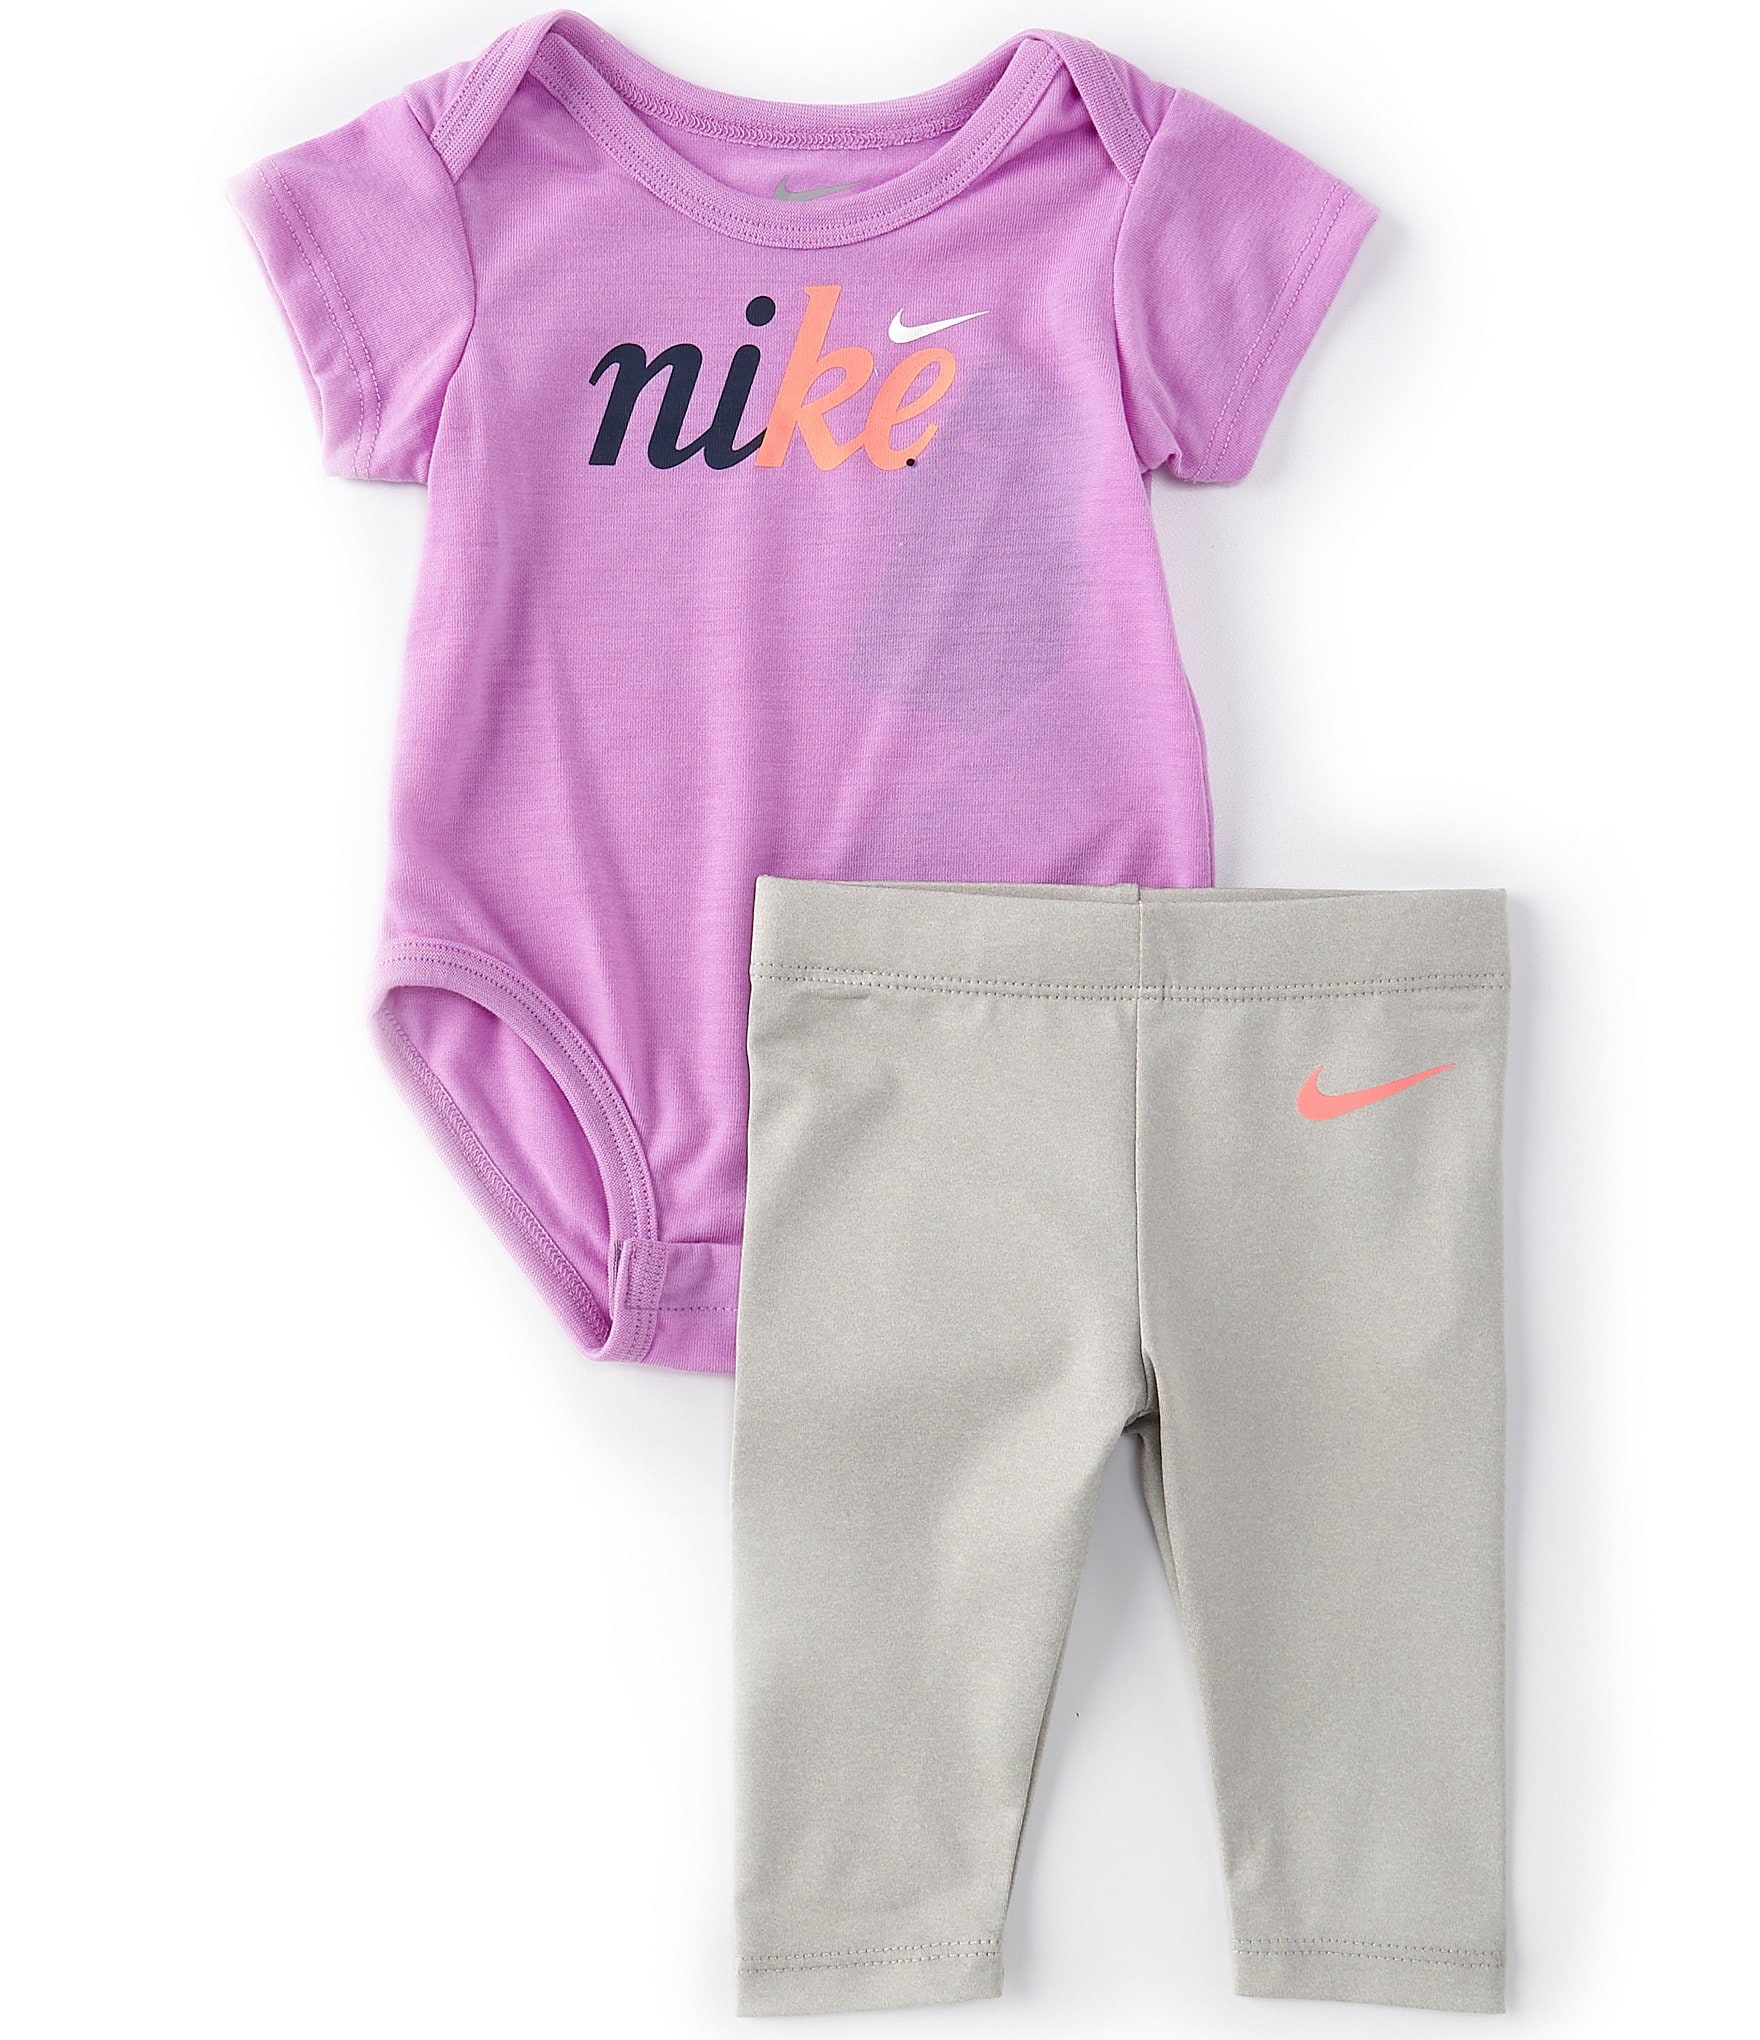 do not do Lil emotional baby clothes nike newborn Shrink theme To govern